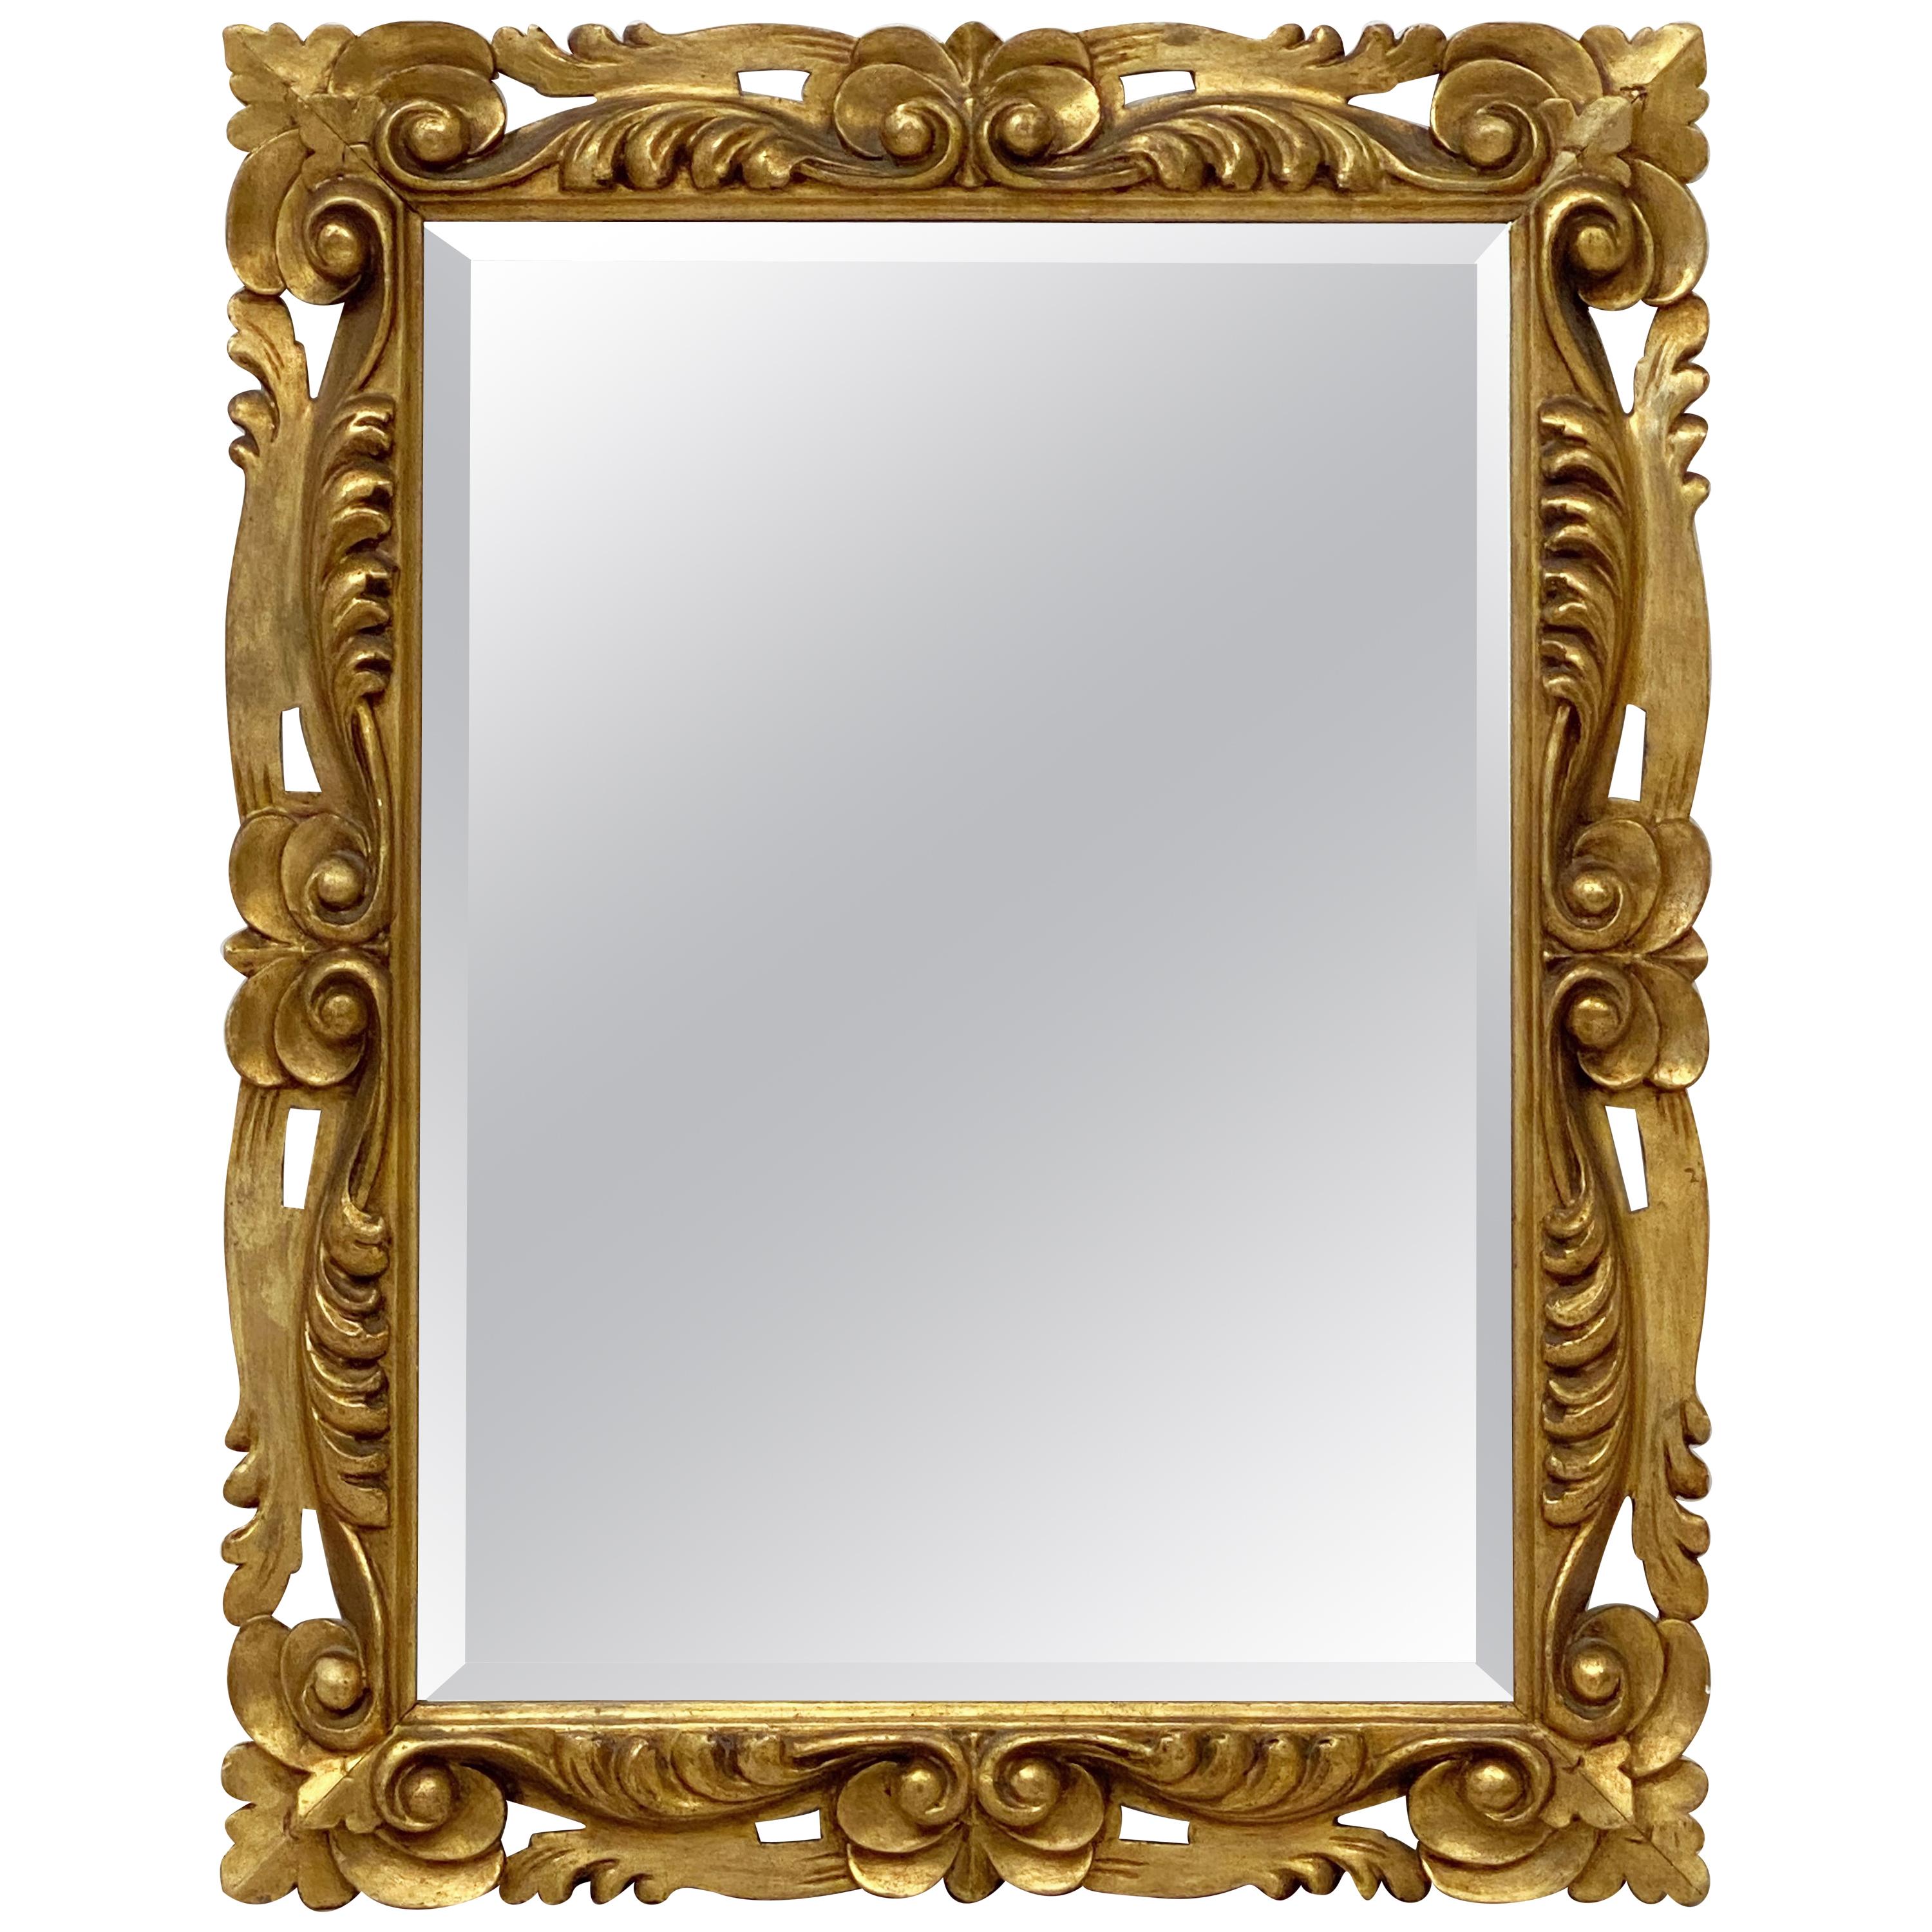 Italian Rococo Rectangular Beveled Mirror with Carved Gilt Frame (H 29 x W 23) For Sale